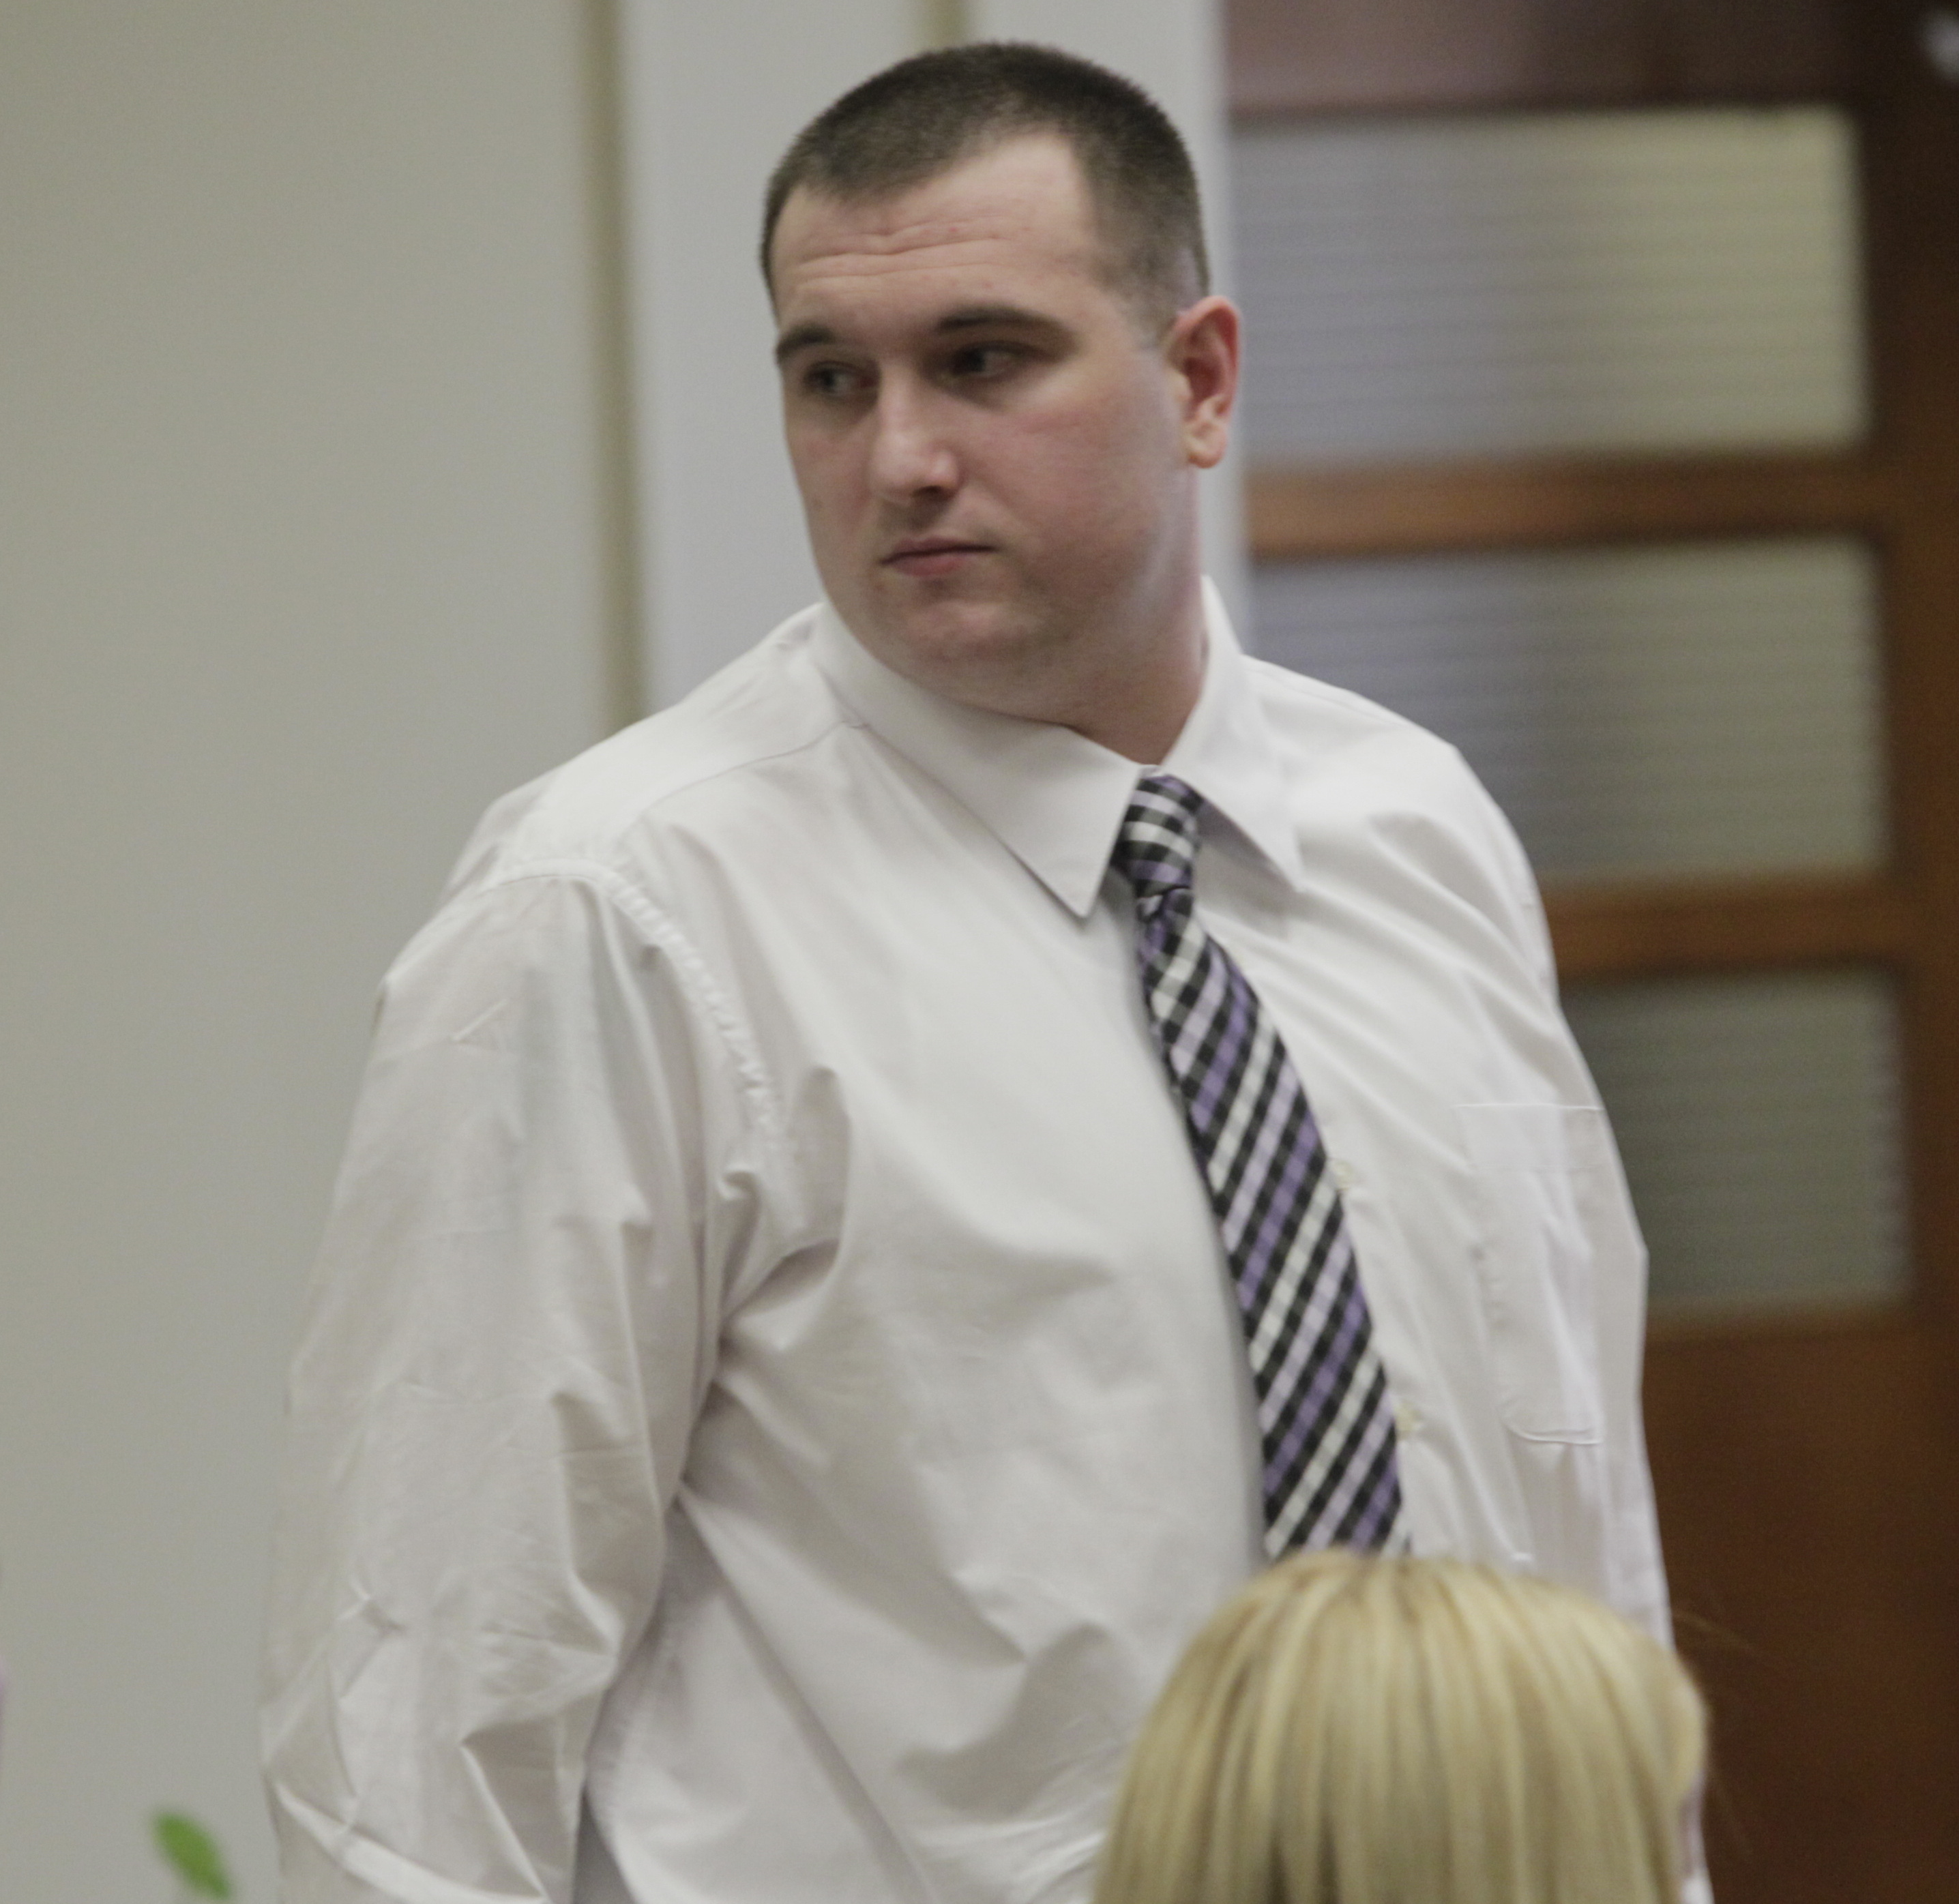 Jury resumes deliberations in capital murder trial The Blade